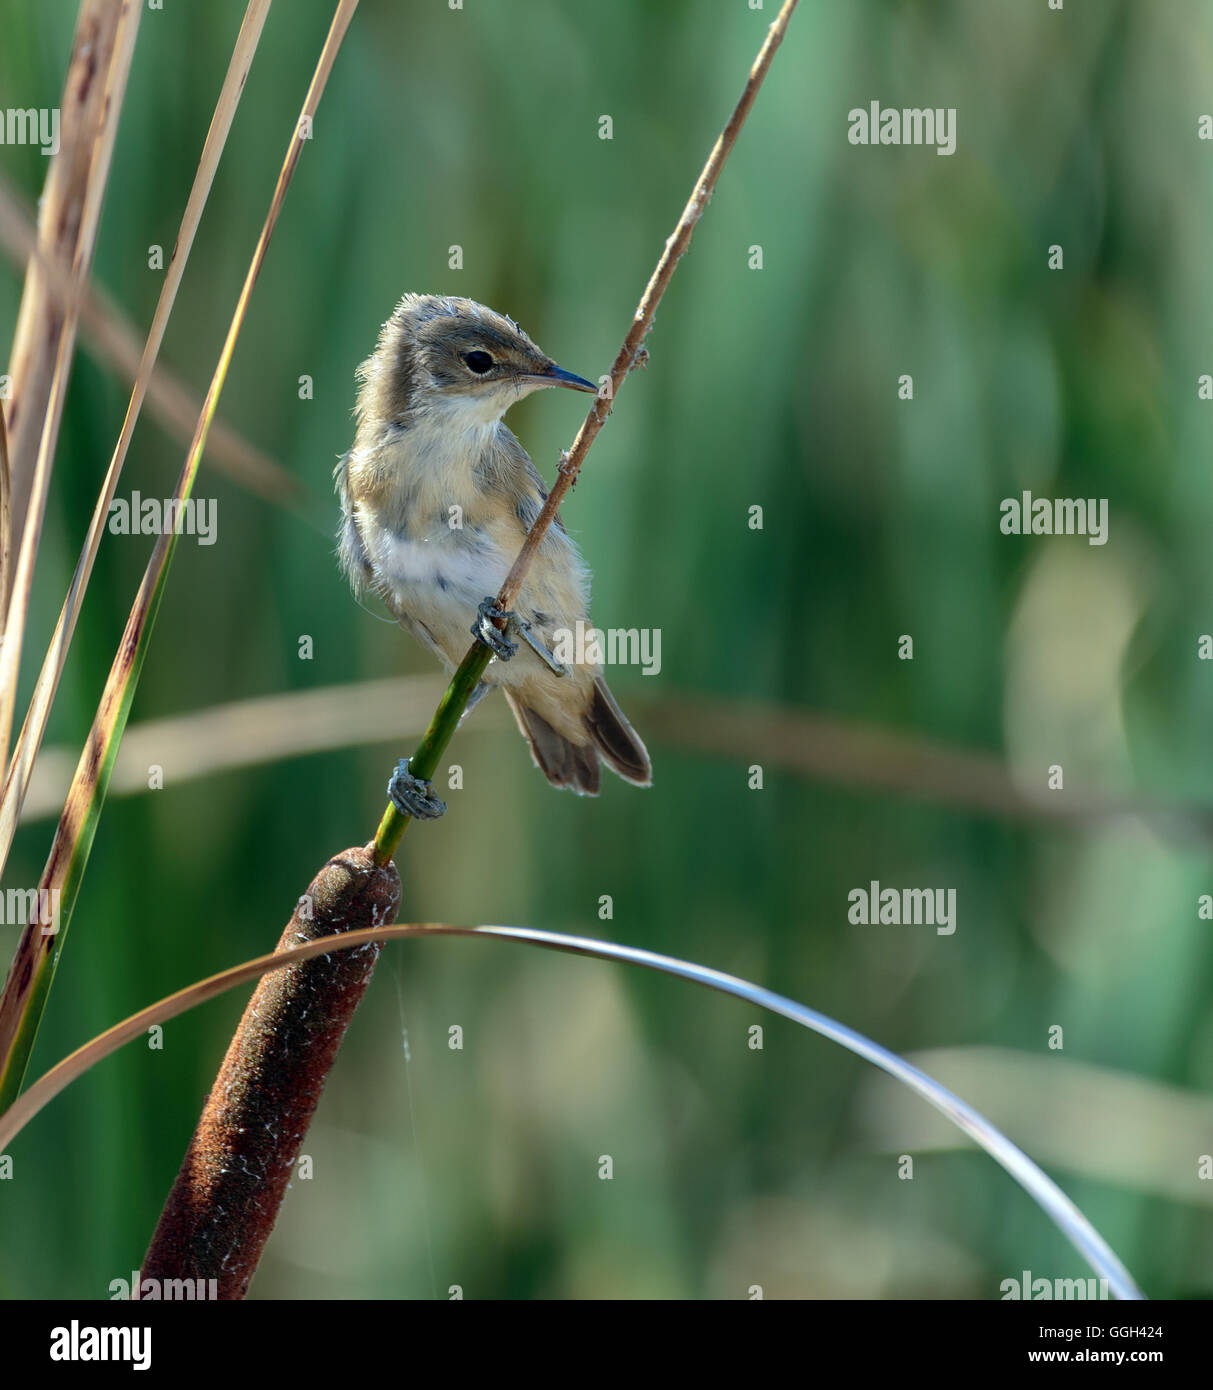 Savi's warbler (Locustella luscinioides) perched on a reed in the swamp Stock Photo